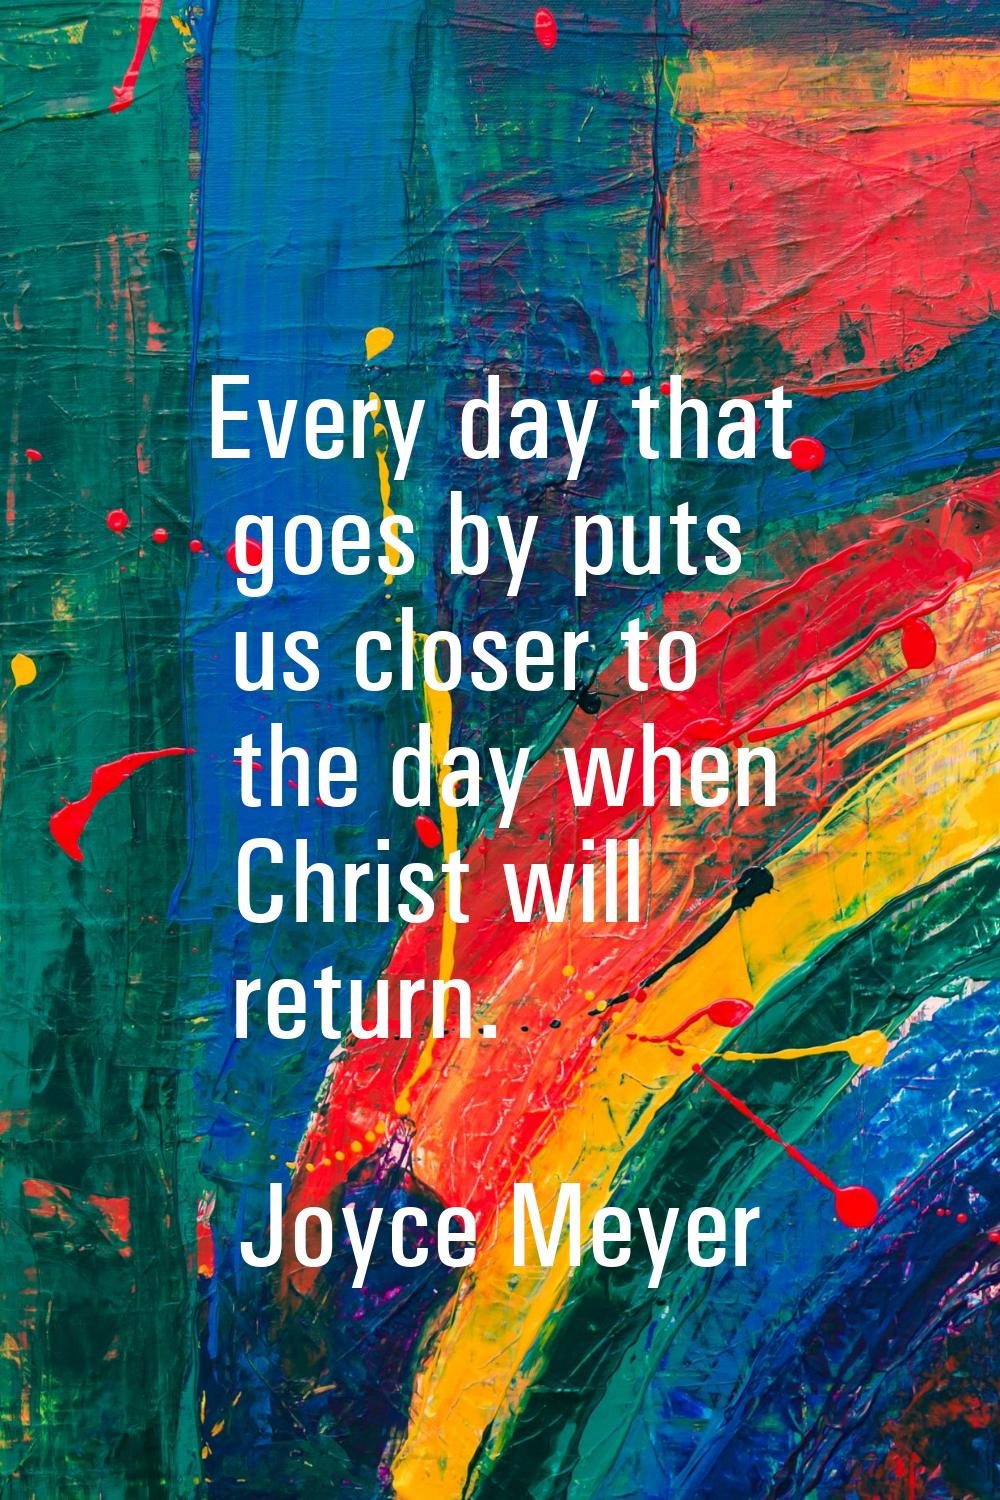 Every day that goes by puts us closer to the day when Christ will return.